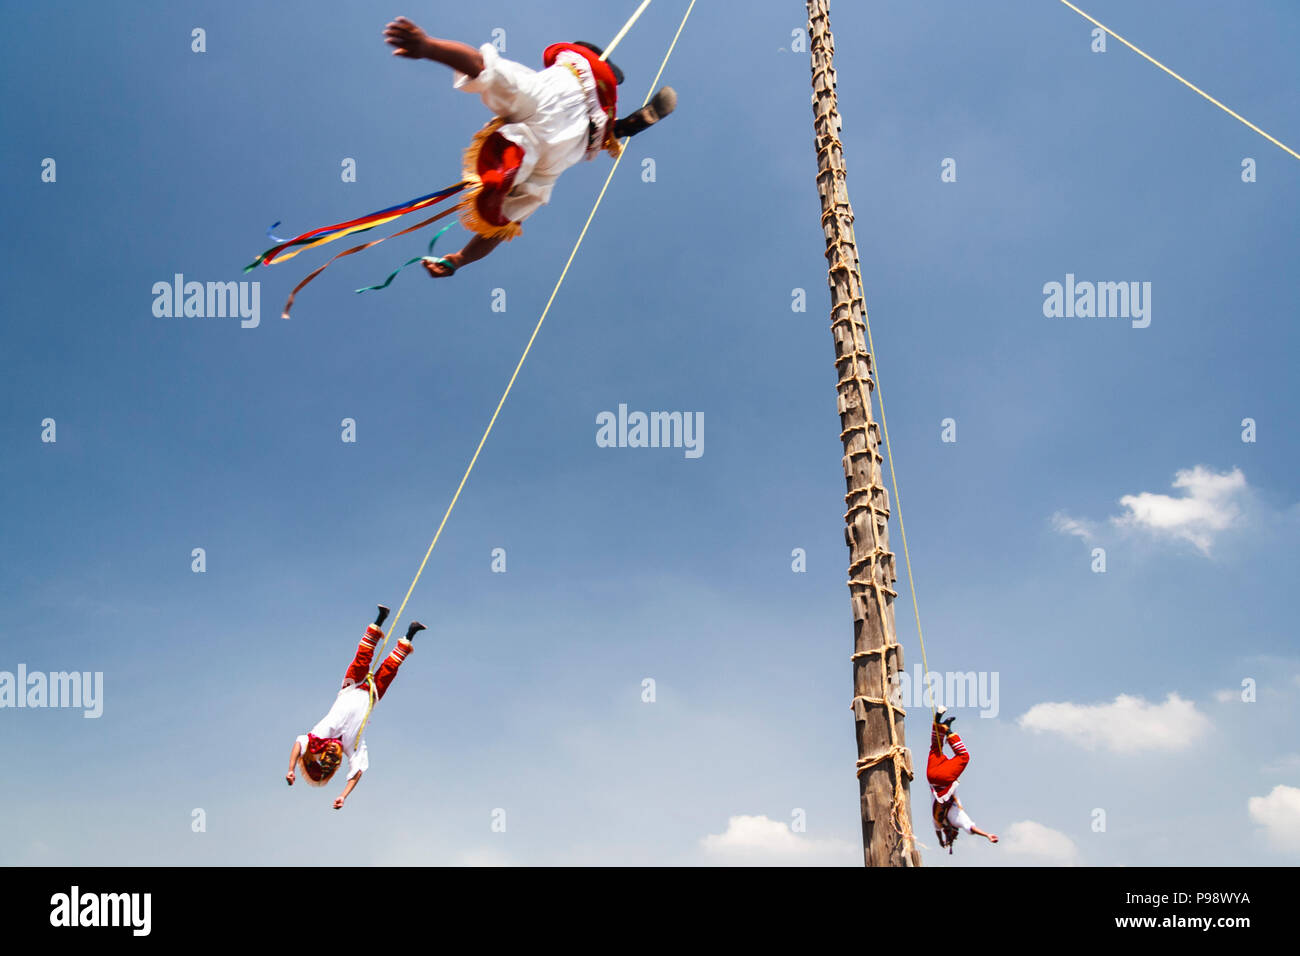 Teotihuacan, Mexico : Totonac people dressed in traditional clothes performing the Voladores or Flying Men ceremony named an Intangible cultural herit Stock Photo